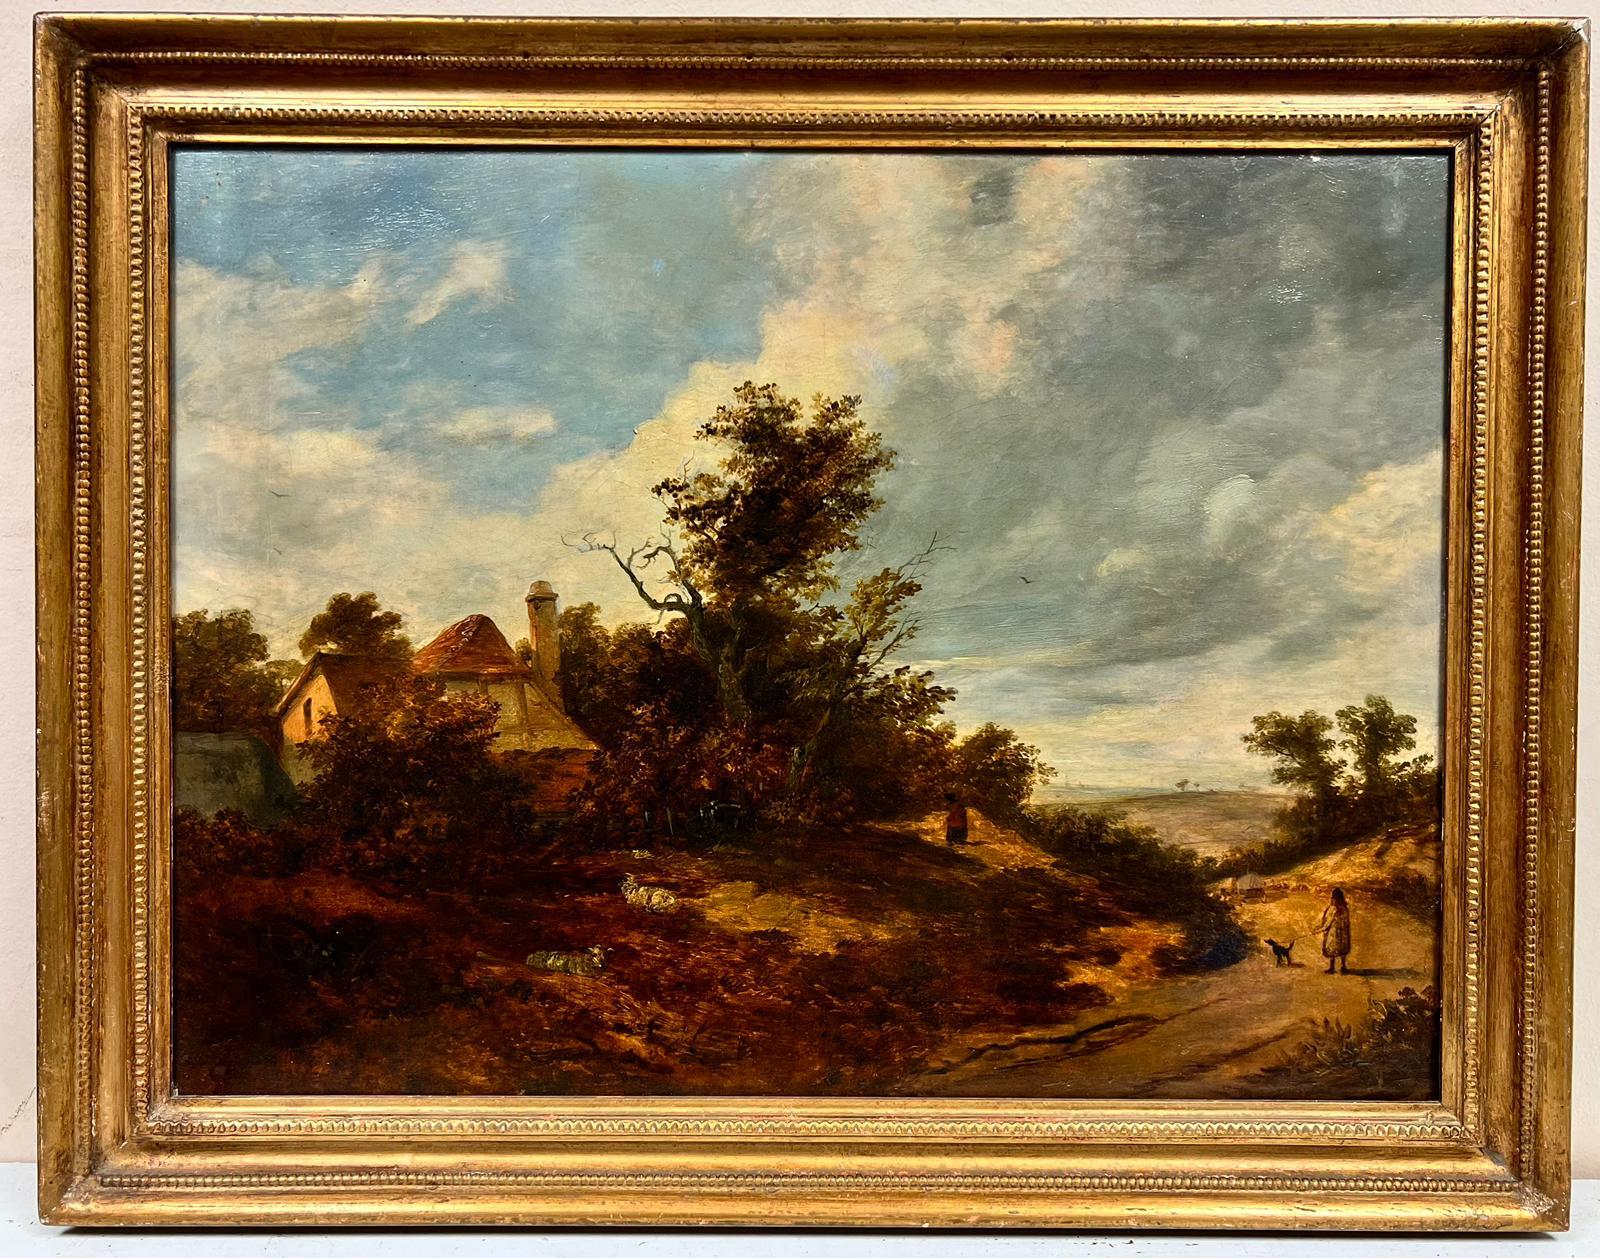 Follower of John Constable Figurative Painting - Fine 1830s English Rural Landscape Large Oil Painting Figures with Dog & Cottage